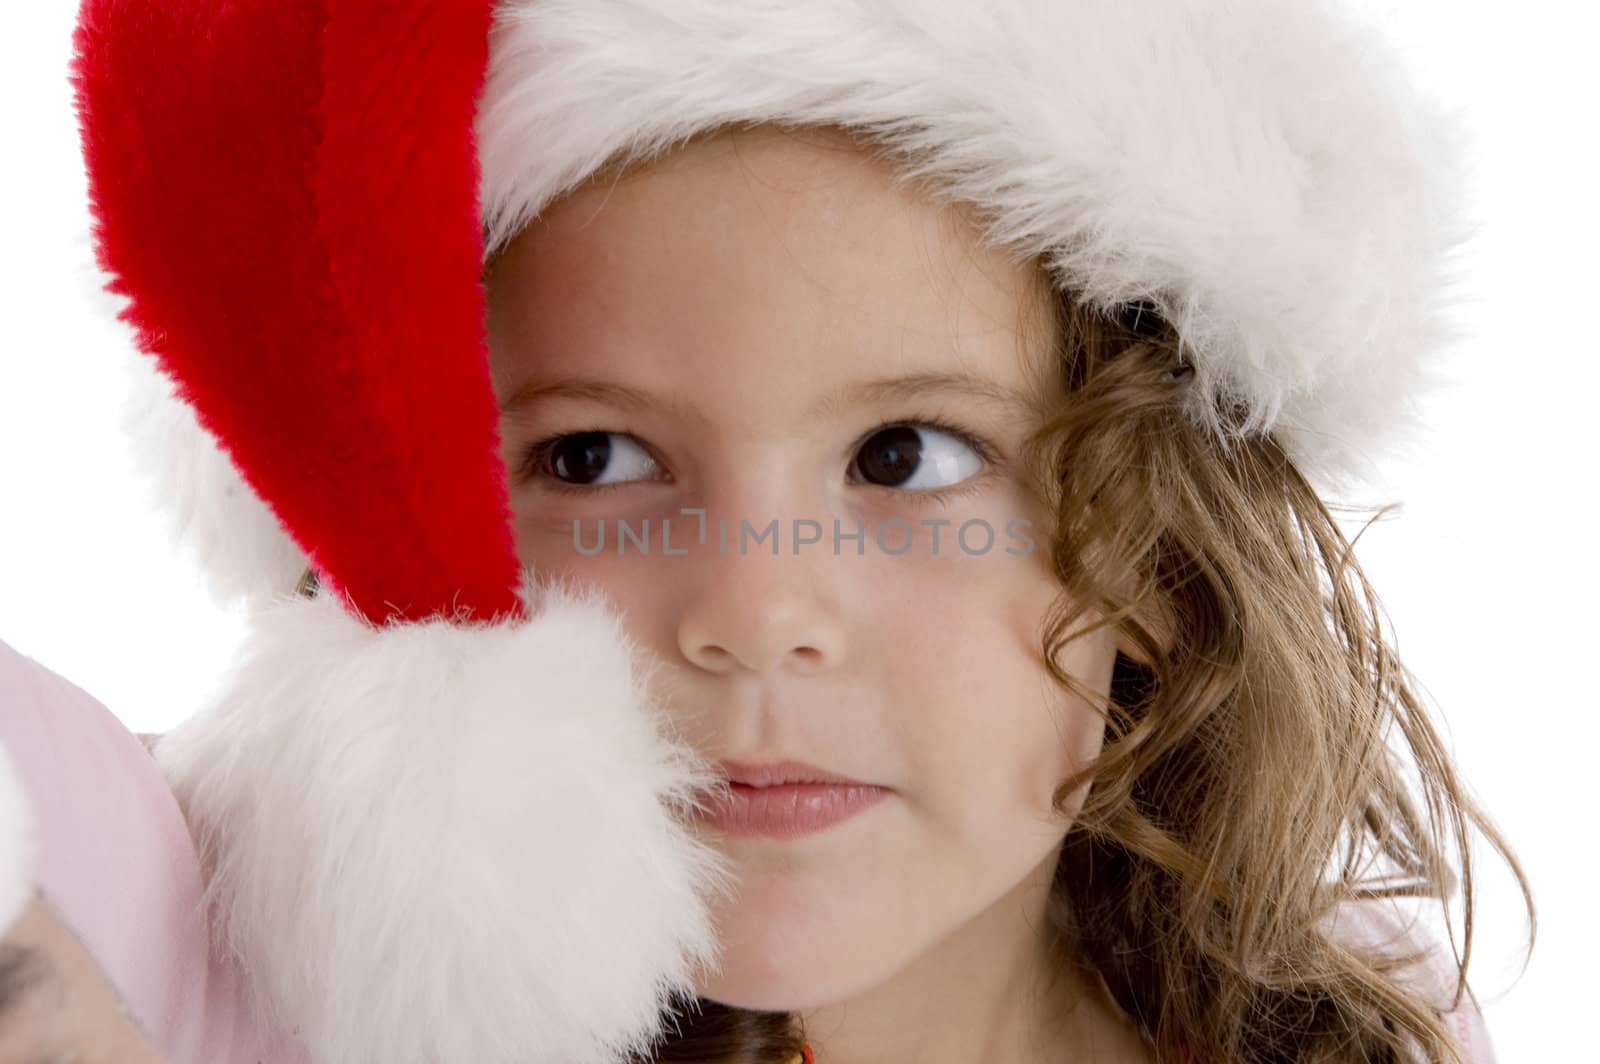 little girl wearing christmas hat by imagerymajestic